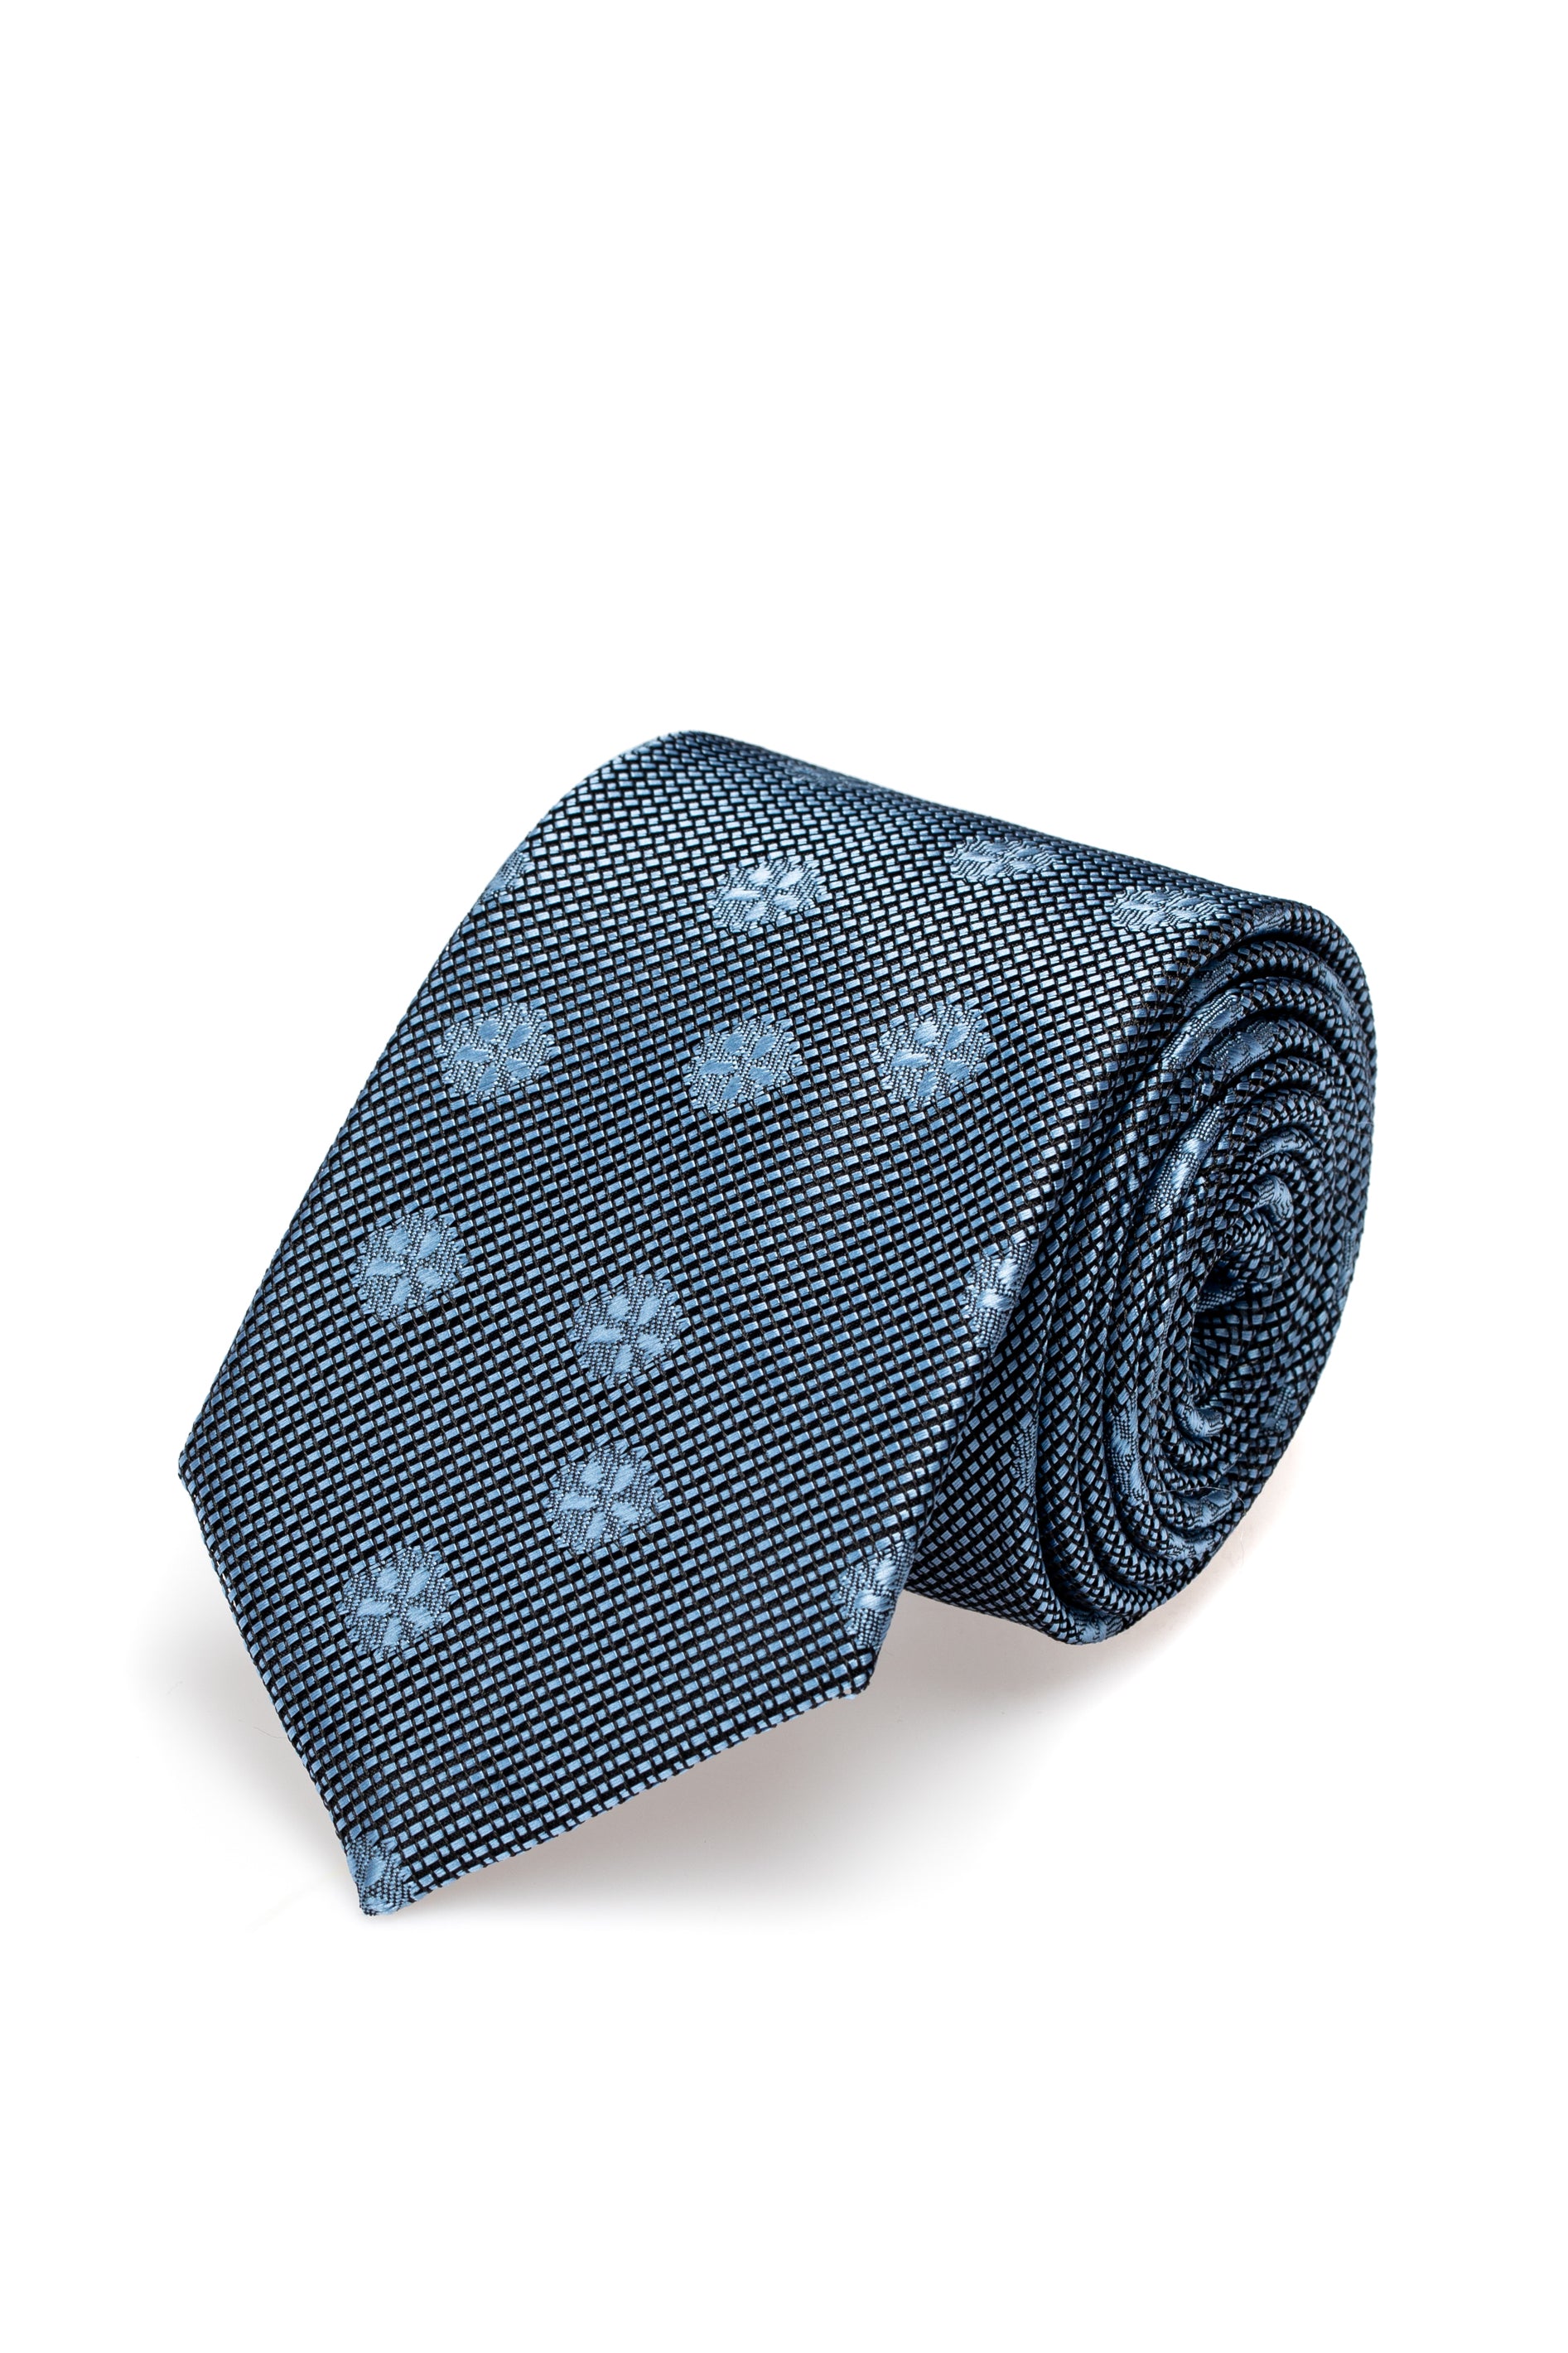 Textured blue silk tie with floral print